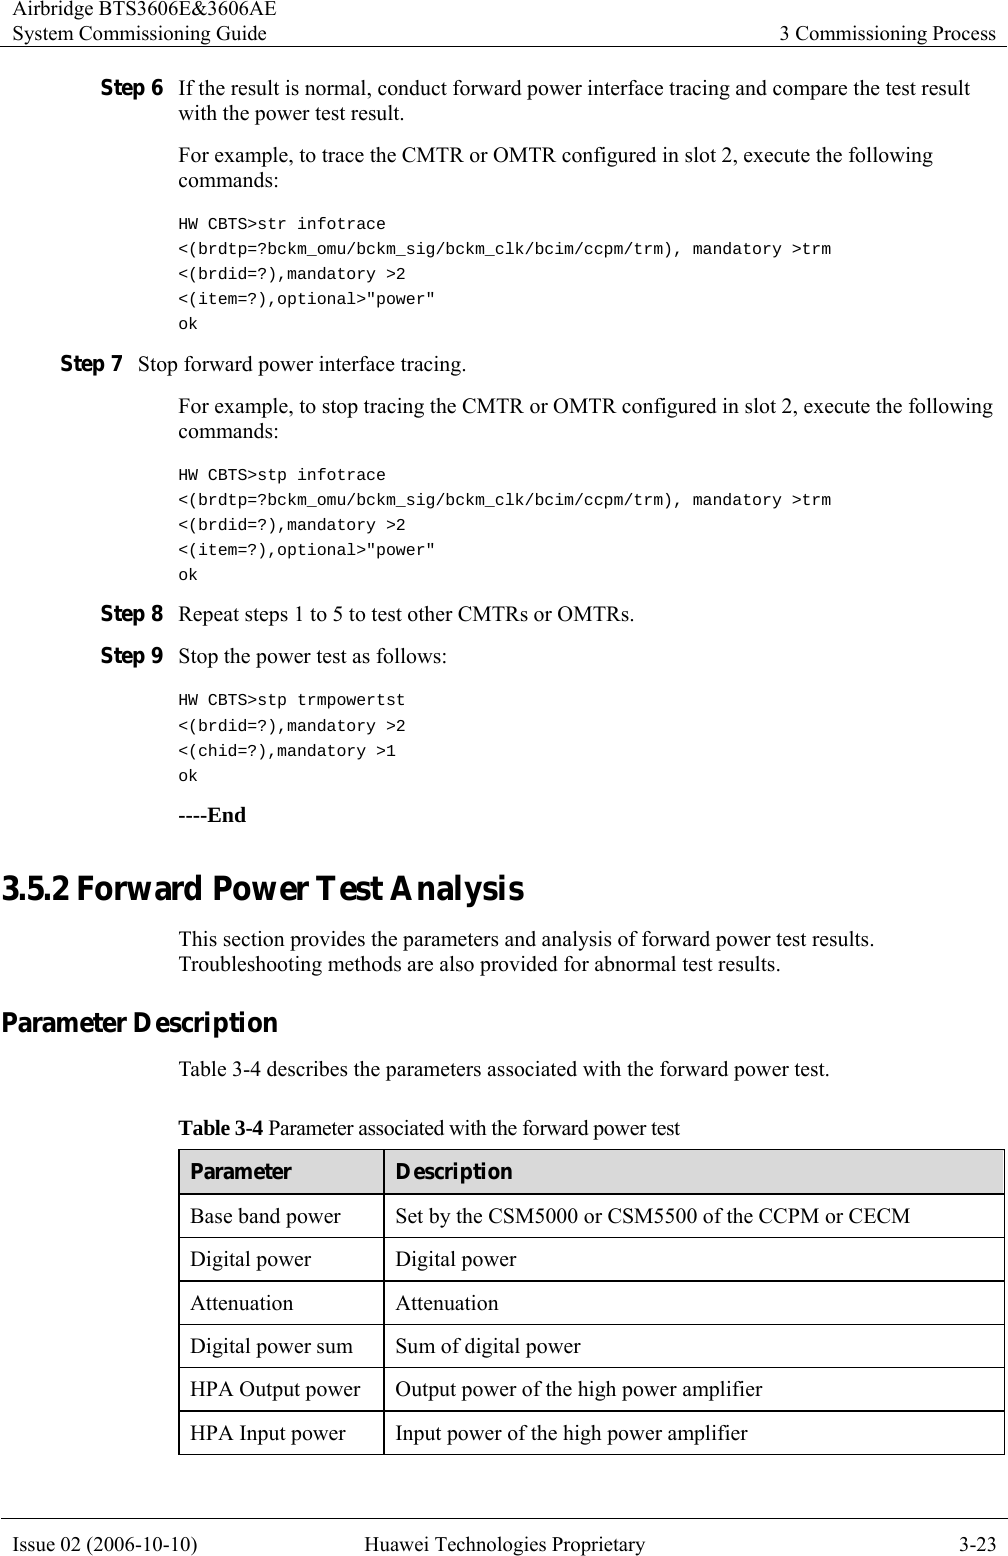 Airbridge BTS3606E&amp;3606AE System Commissioning Guide  3 Commissioning Process Issue 02 (2006-10-10)  Huawei Technologies Proprietary  3-23 Step 6 If the result is normal, conduct forward power interface tracing and compare the test result with the power test result. For example, to trace the CMTR or OMTR configured in slot 2, execute the following commands:  HW CBTS&gt;str infotrace &lt;(brdtp=?bckm_omu/bckm_sig/bckm_clk/bcim/ccpm/trm), mandatory &gt;trm &lt;(brdid=?),mandatory &gt;2 &lt;(item=?),optional&gt;&quot;power&quot; ok Step 7 Stop forward power interface tracing.   For example, to stop tracing the CMTR or OMTR configured in slot 2, execute the following commands:  HW CBTS&gt;stp infotrace &lt;(brdtp=?bckm_omu/bckm_sig/bckm_clk/bcim/ccpm/trm), mandatory &gt;trm &lt;(brdid=?),mandatory &gt;2 &lt;(item=?),optional&gt;&quot;power&quot; ok Step 8 Repeat steps 1 to 5 to test other CMTRs or OMTRs. Step 9 Stop the power test as follows: HW CBTS&gt;stp trmpowertst &lt;(brdid=?),mandatory &gt;2 &lt;(chid=?),mandatory &gt;1 ok ----End 3.5.2 Forward Power Test Analysis This section provides the parameters and analysis of forward power test results. Troubleshooting methods are also provided for abnormal test results. Parameter Description Table 3-4 describes the parameters associated with the forward power test.   Table 3-4 Parameter associated with the forward power test Parameter  Description Base band power  Set by the CSM5000 or CSM5500 of the CCPM or CECM   Digital power  Digital power Attenuation Attenuation Digital power sum  Sum of digital power HPA Output power  Output power of the high power amplifier HPA Input power  Input power of the high power amplifier 